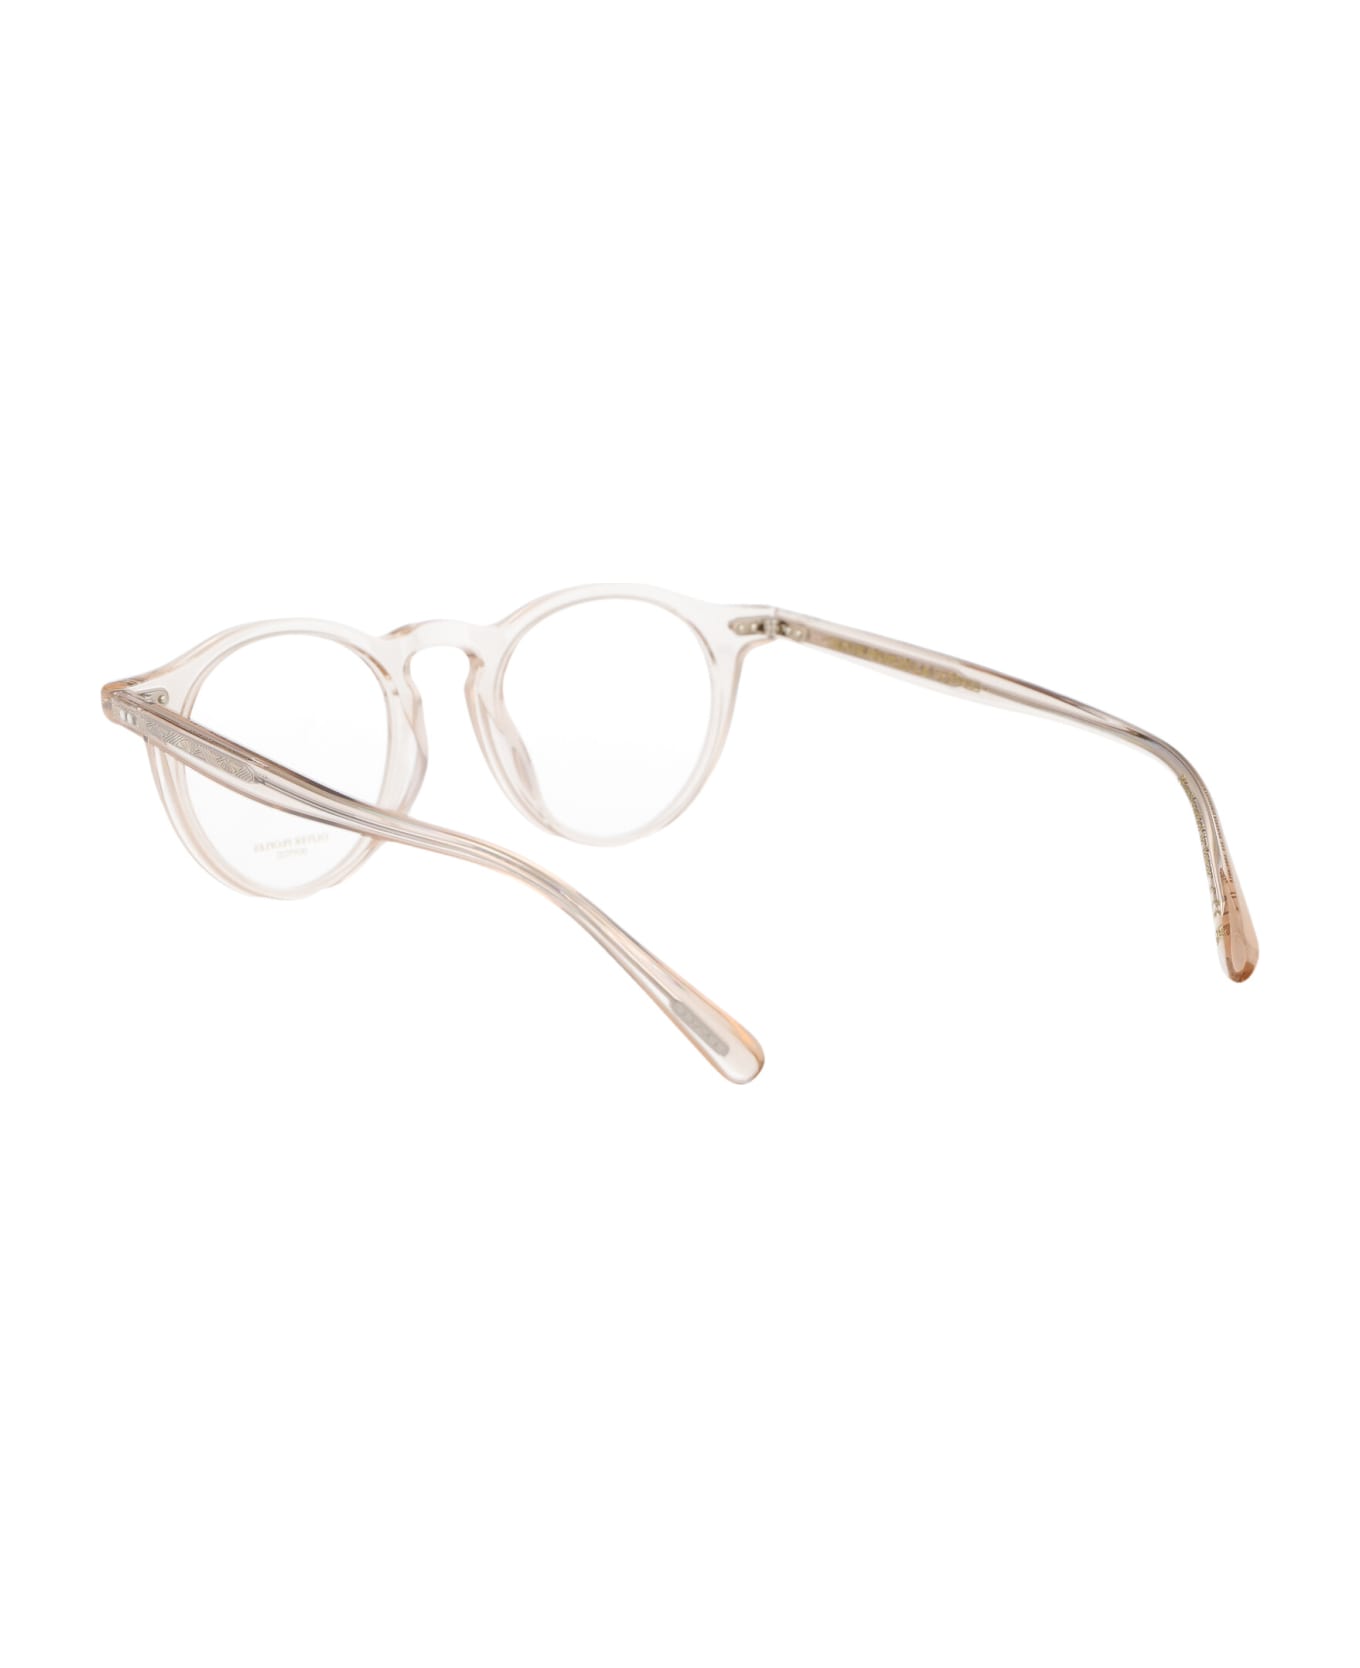 Oliver Peoples Op-13 Glasses - 1743 Cherry Blossom アイウェア